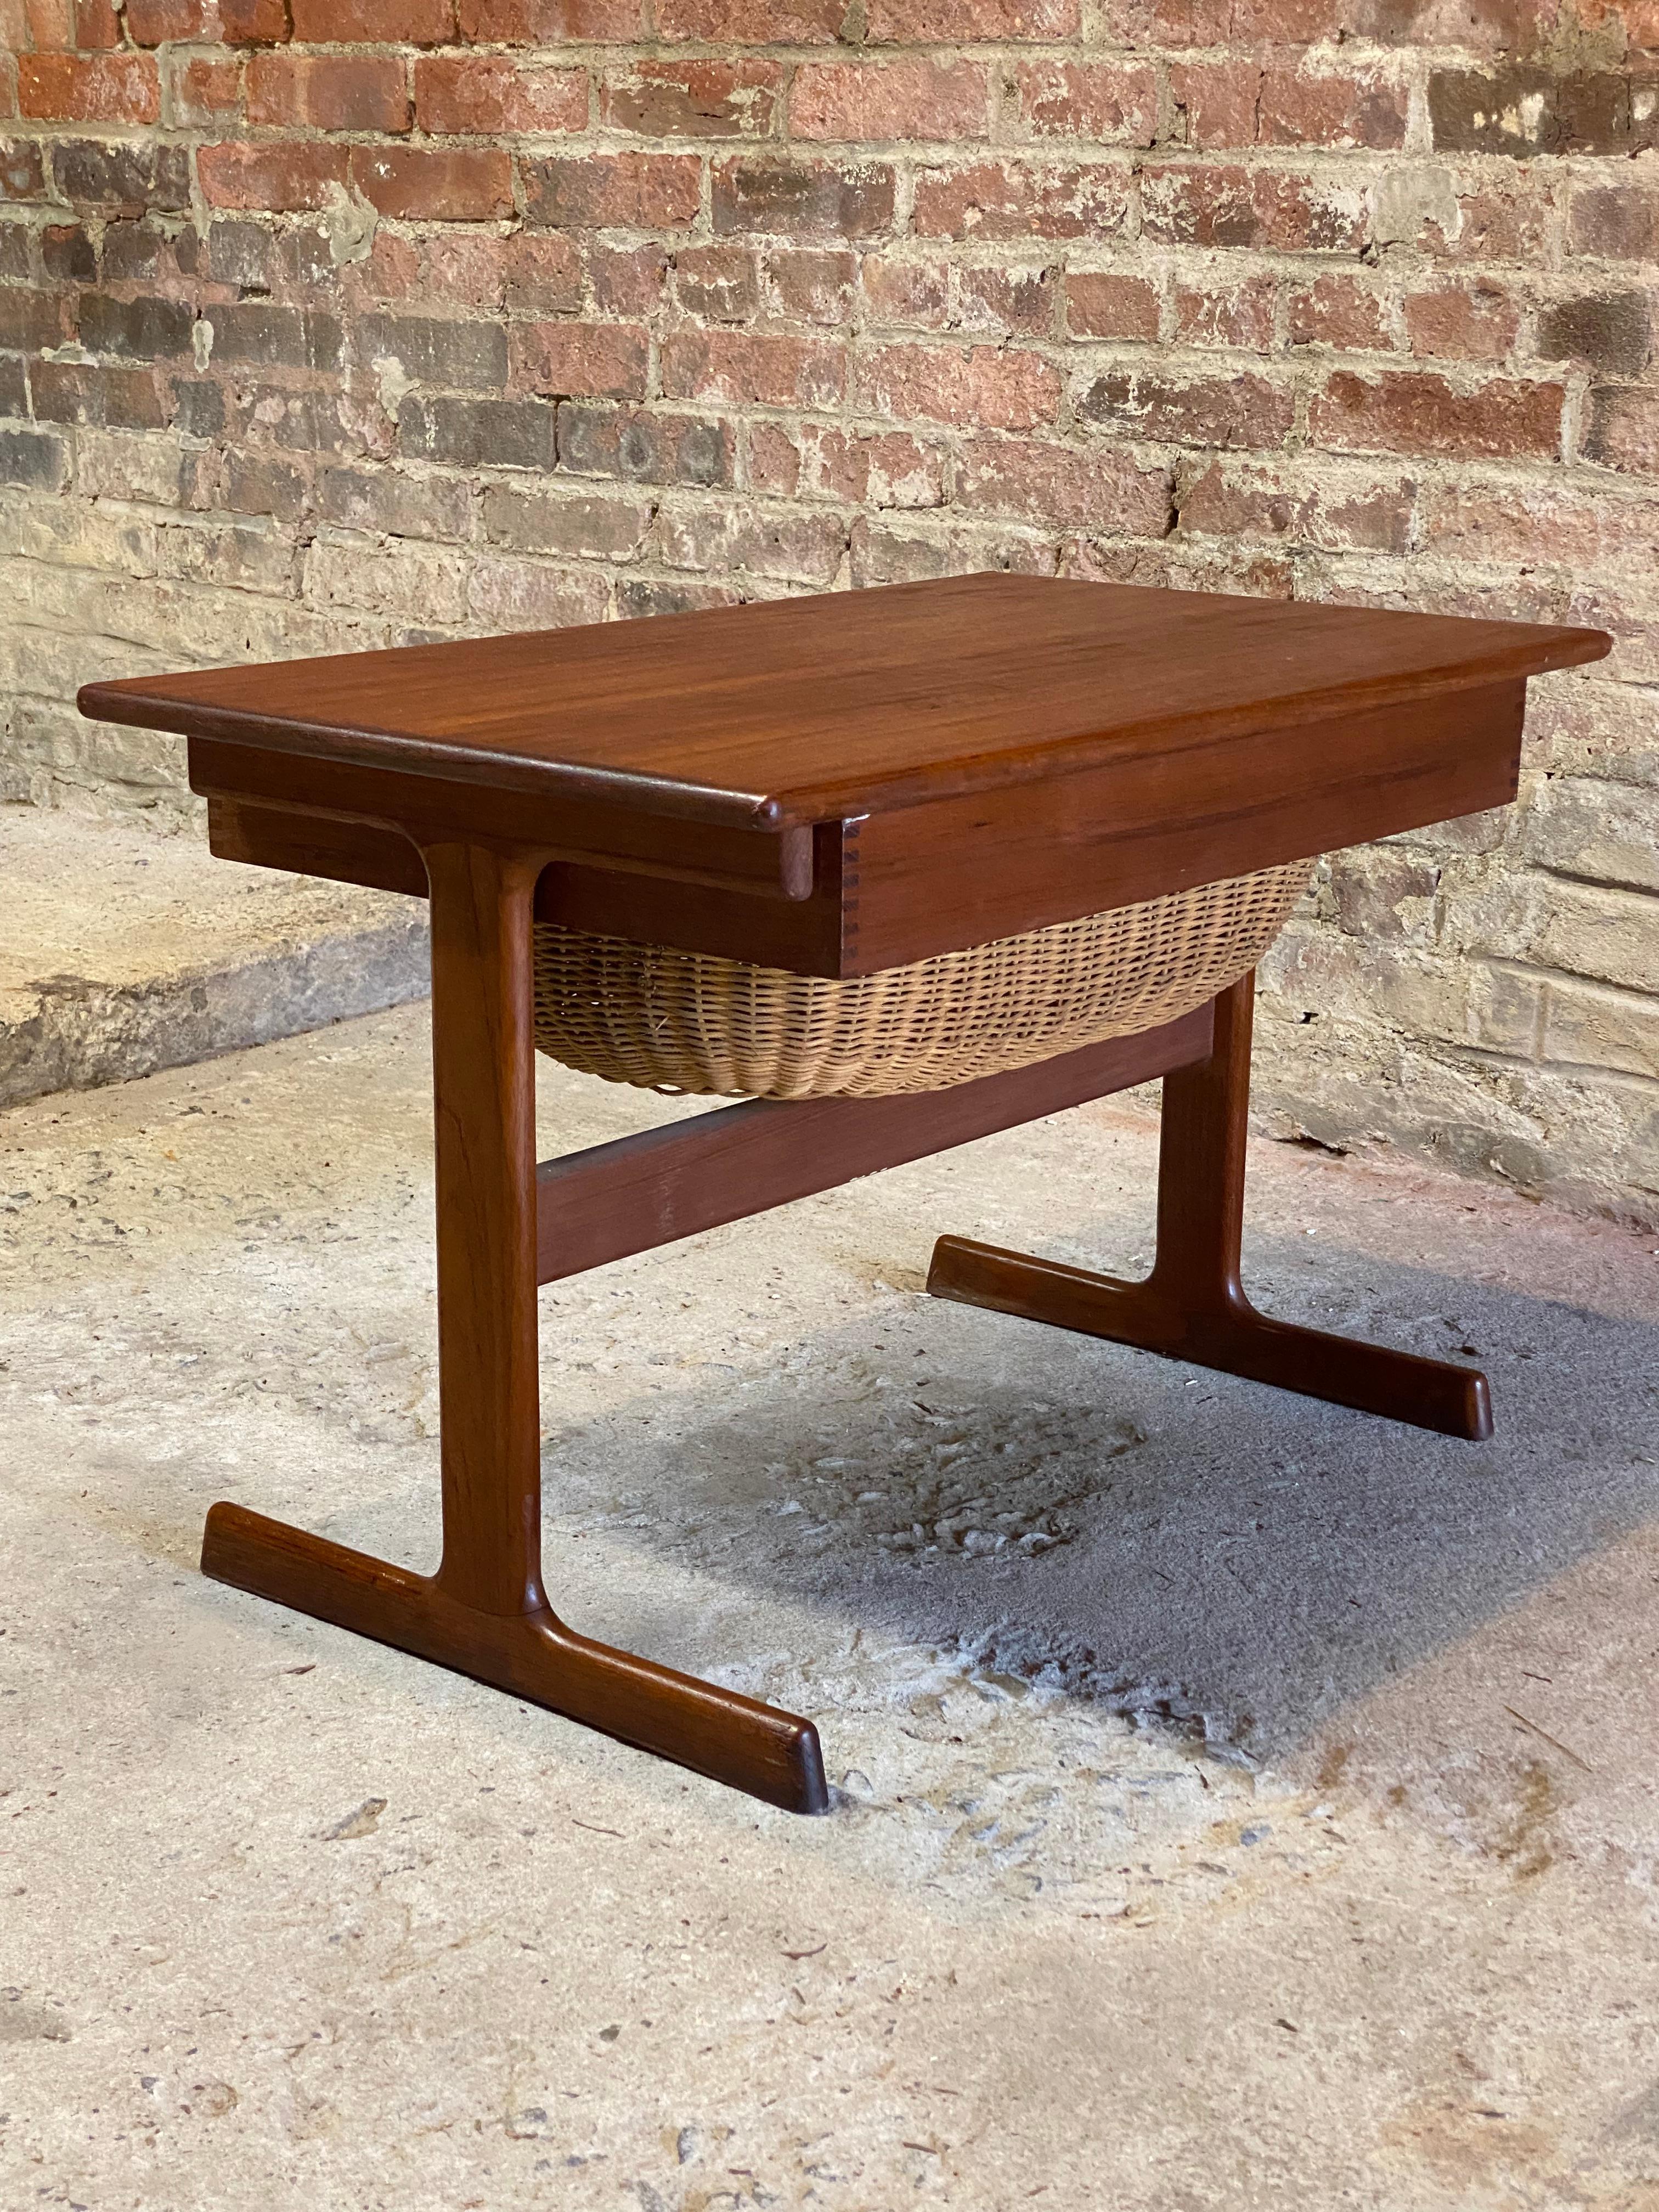 Stylish Danish Modern teak and wicker sewing stand designed by Kai Kristiansen for Vildbjerg Mobelfabrik, Denmark. Circa 1960. Featuring a roomy slide out wicker basket and a divided utility drawer for tools of the trade like thread spools, knitting